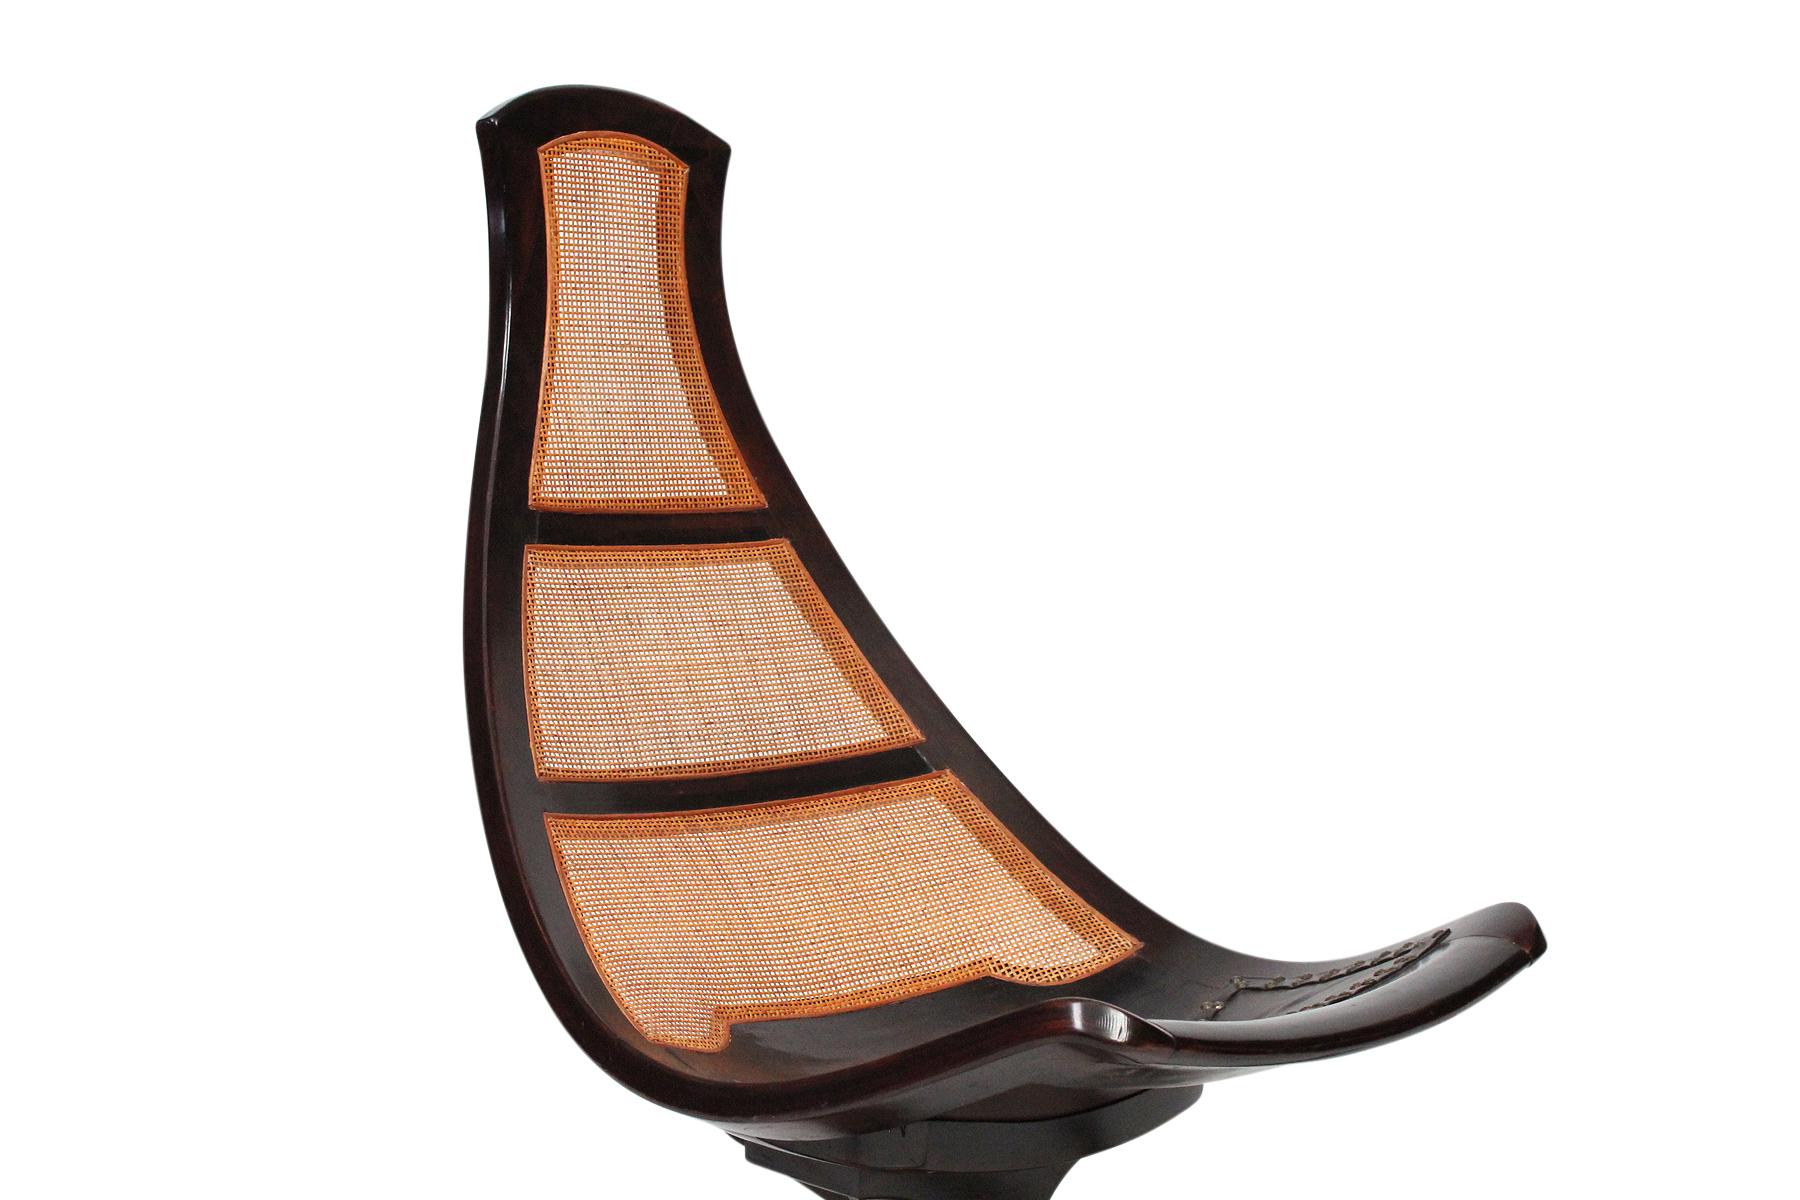 Brazilian Cane and Exotic Wood Rocking Chair